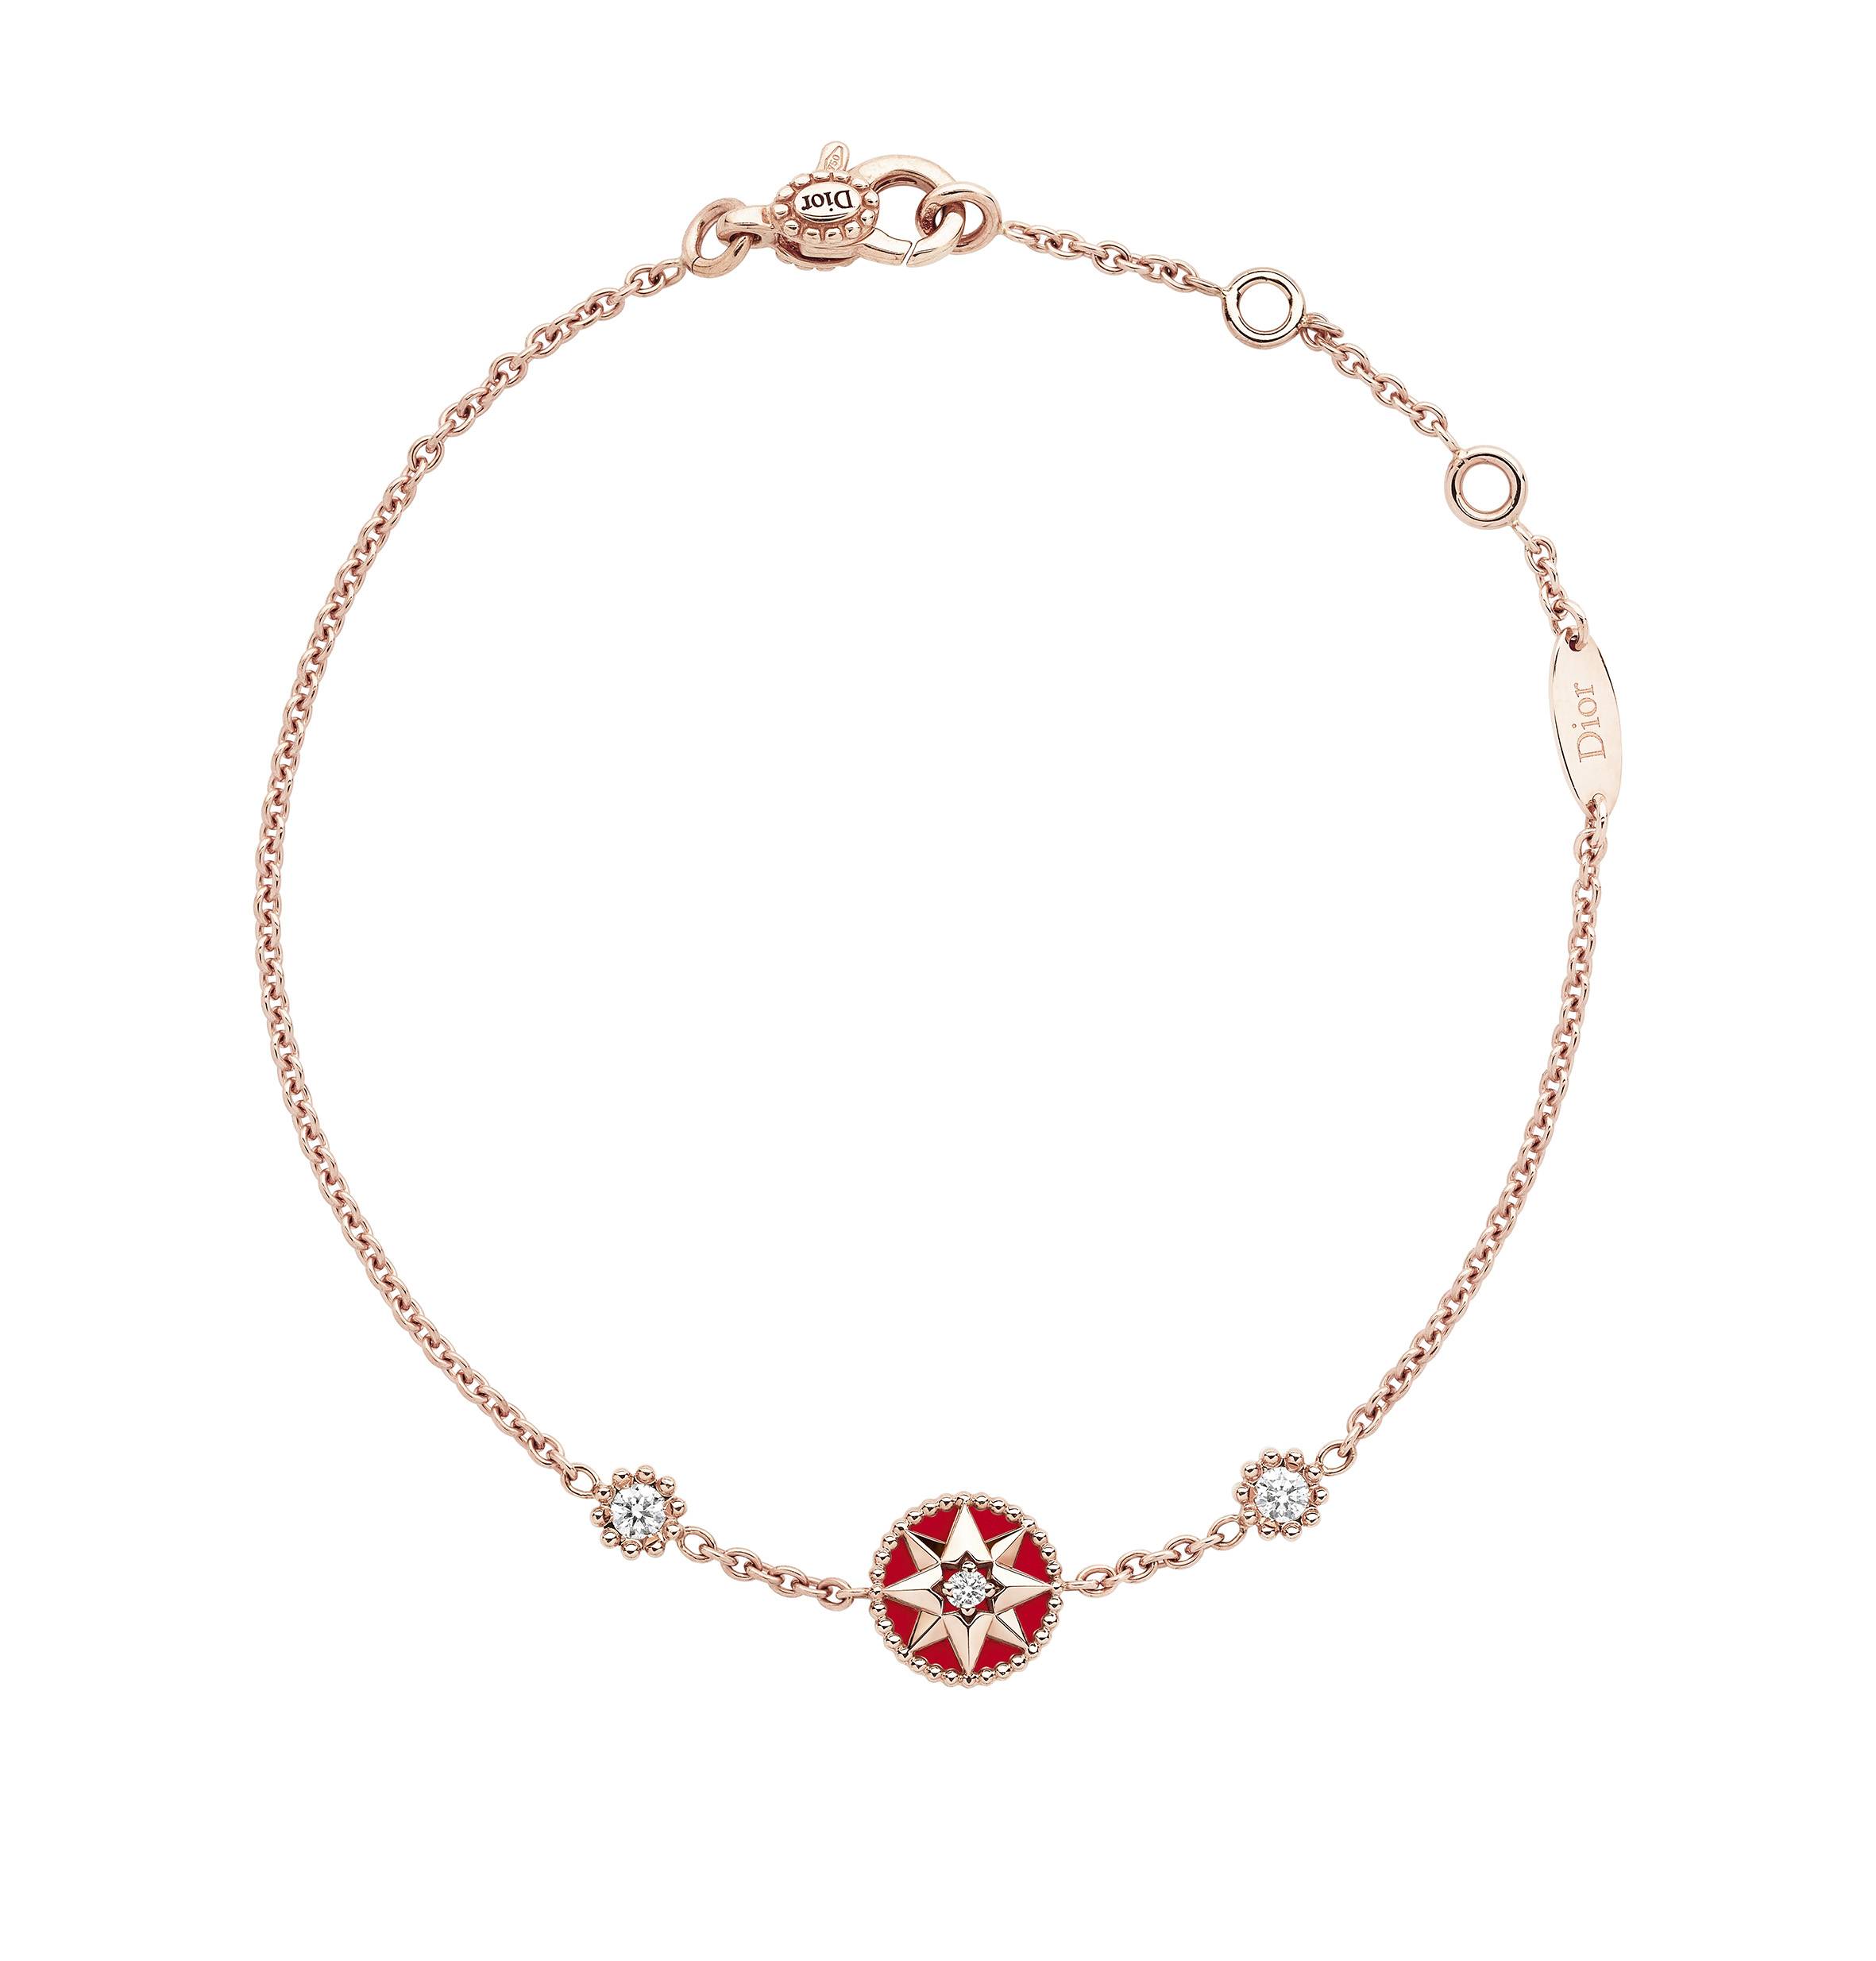 ROSE DES VENTS BRACELET Pink Gold with Diamonds and Red Ceramic $17,300